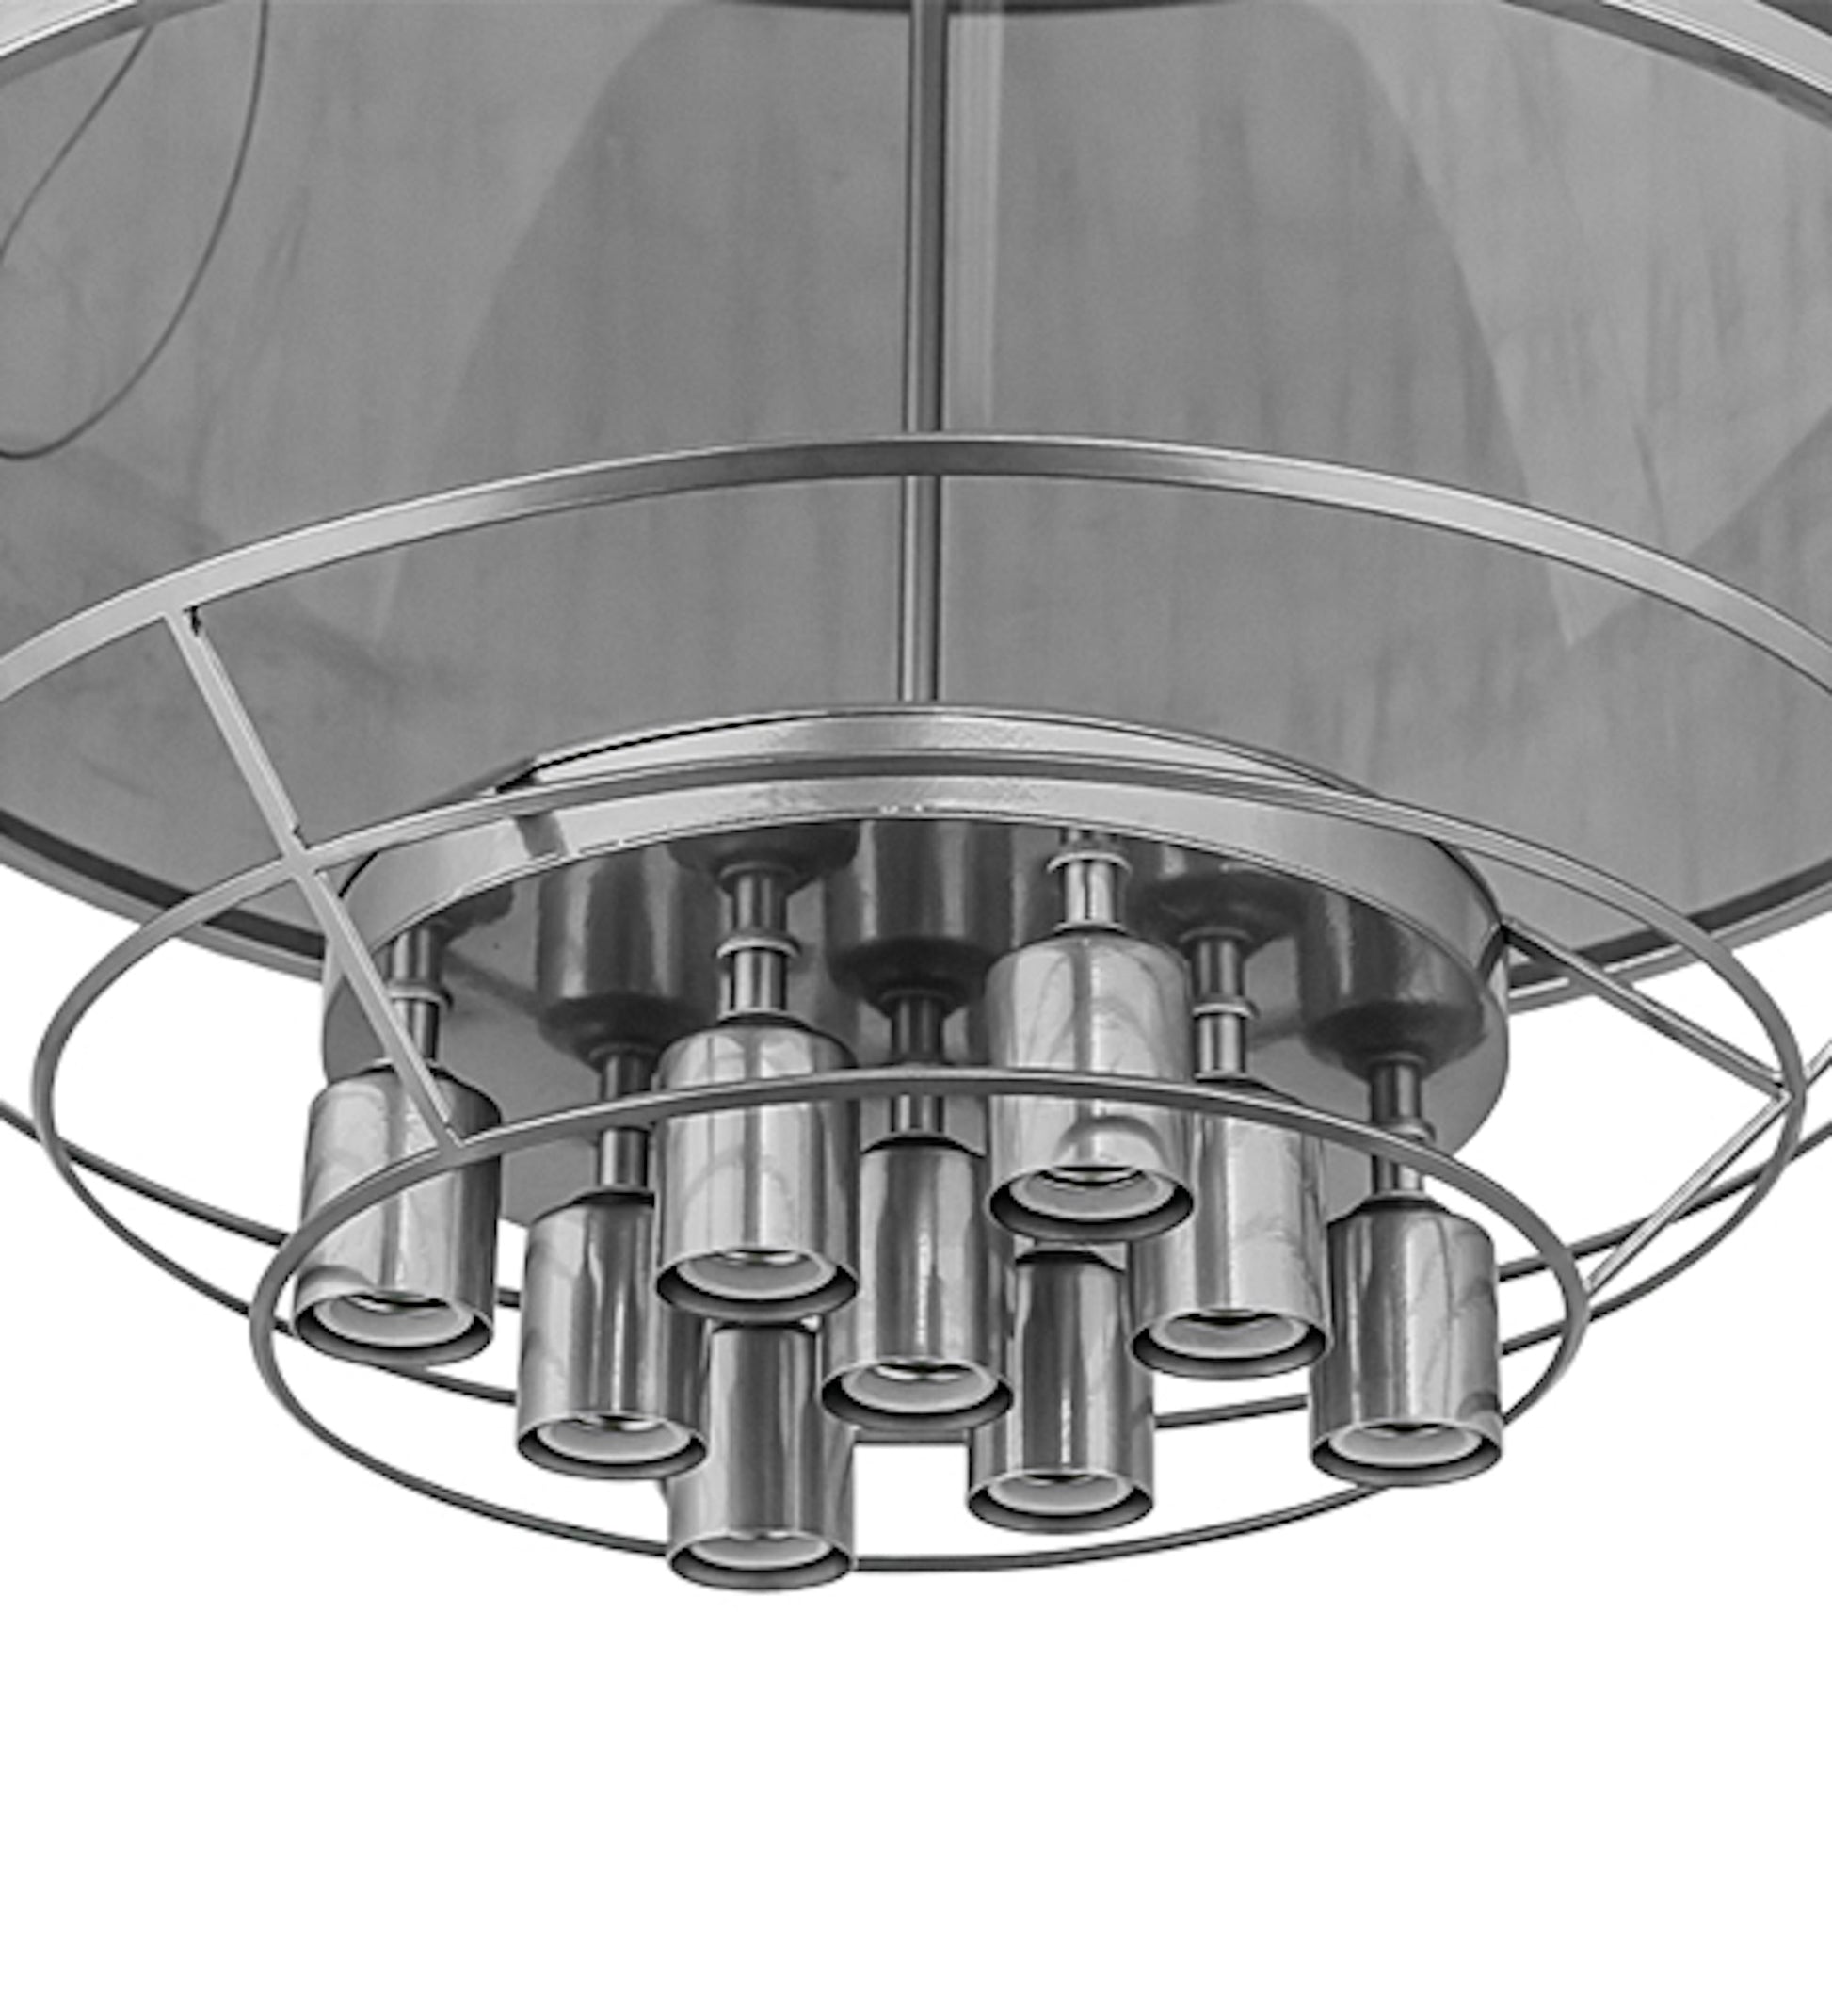 24" Cilindro Shimmer Pendant by 2nd Ave Lighting